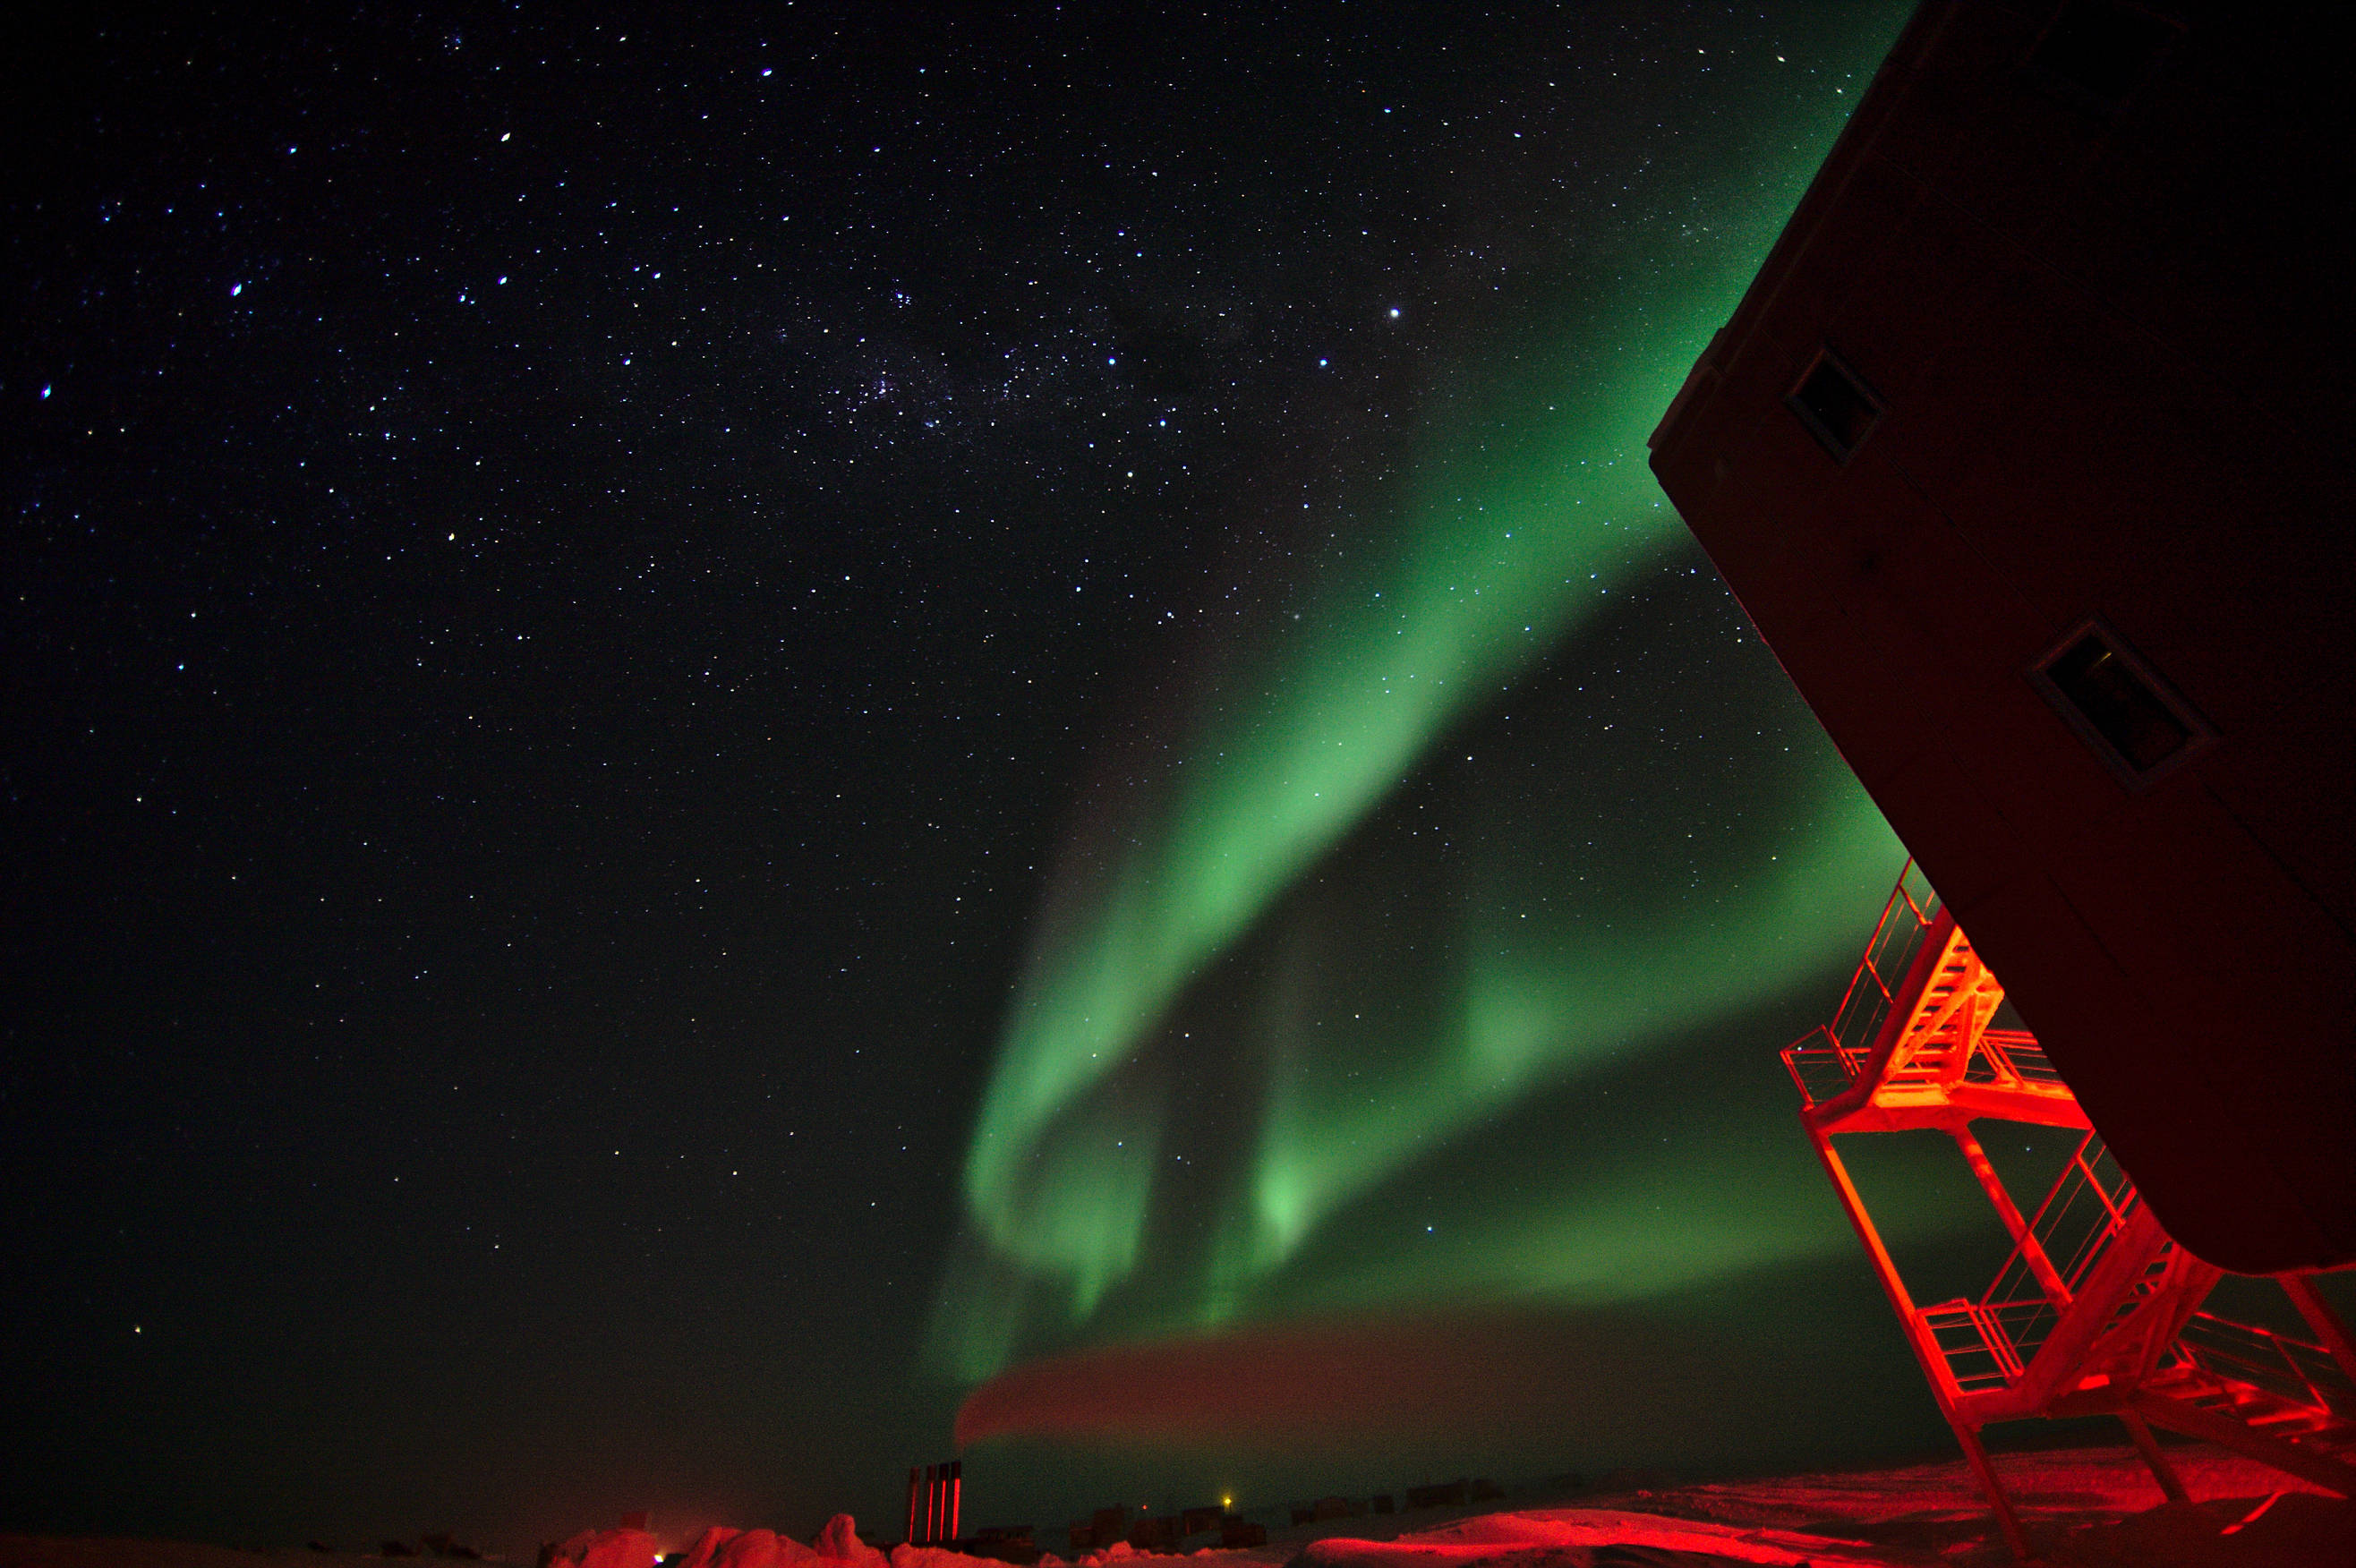 Auroras above the summer camp and power plant. To the right a corner of the station building with the red-illuminated emergency exits